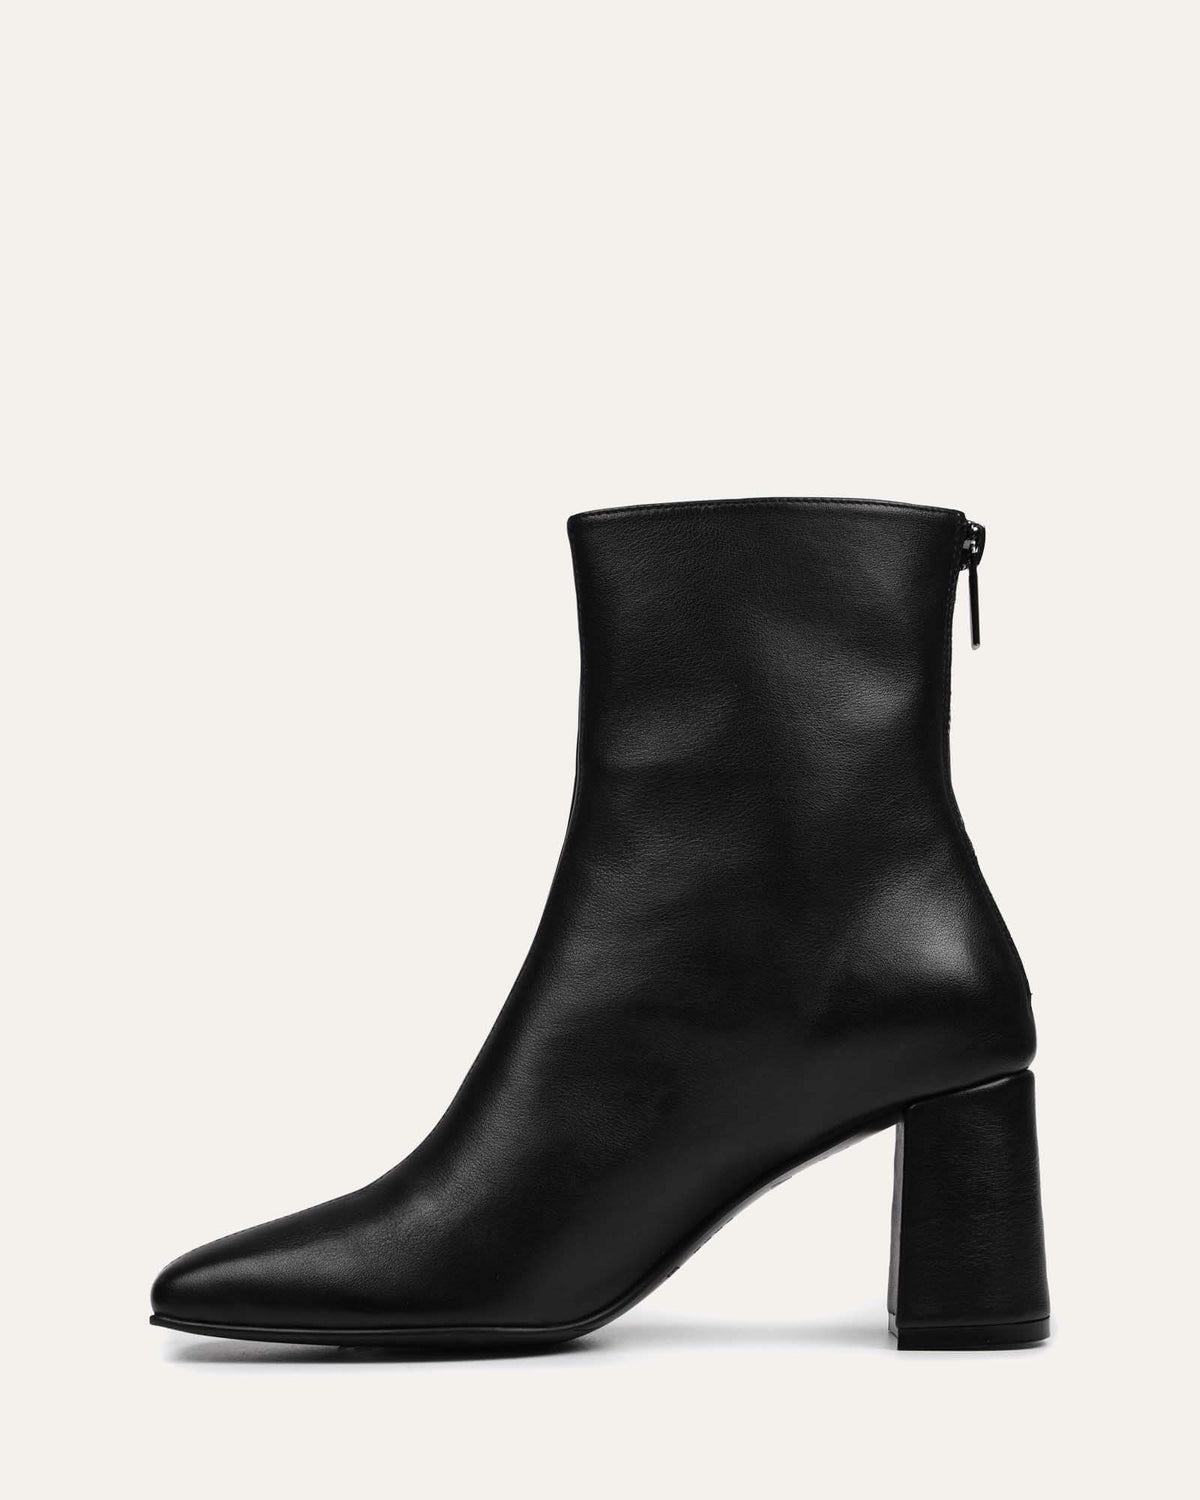 NEVADA MID ANKLE BOOTS BLACK LEATHER